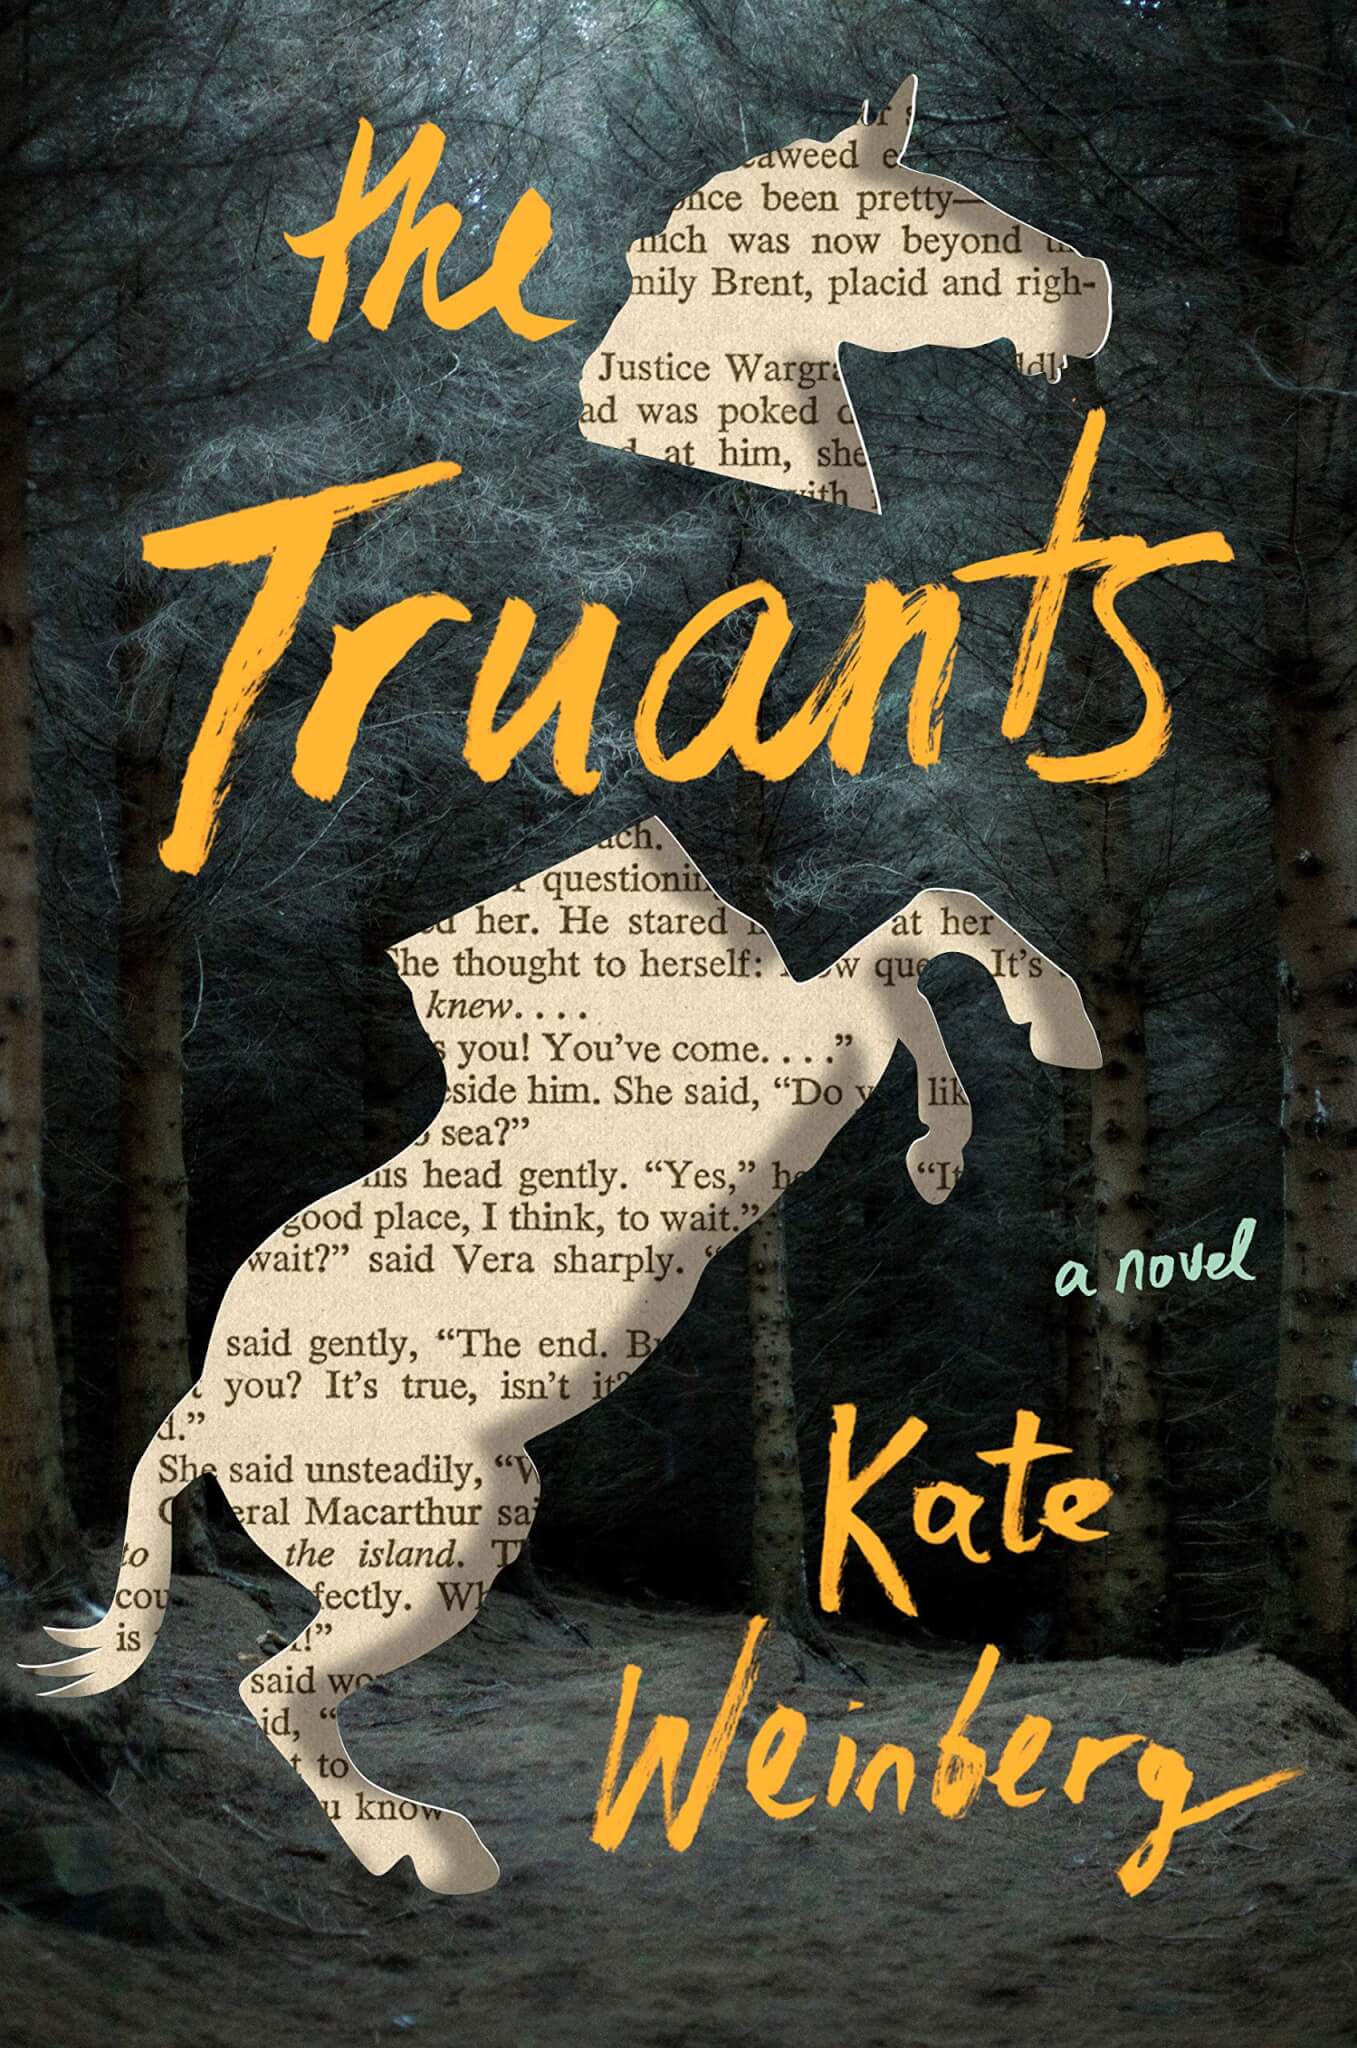 “The Truants” (2019) by Kate Weinberg